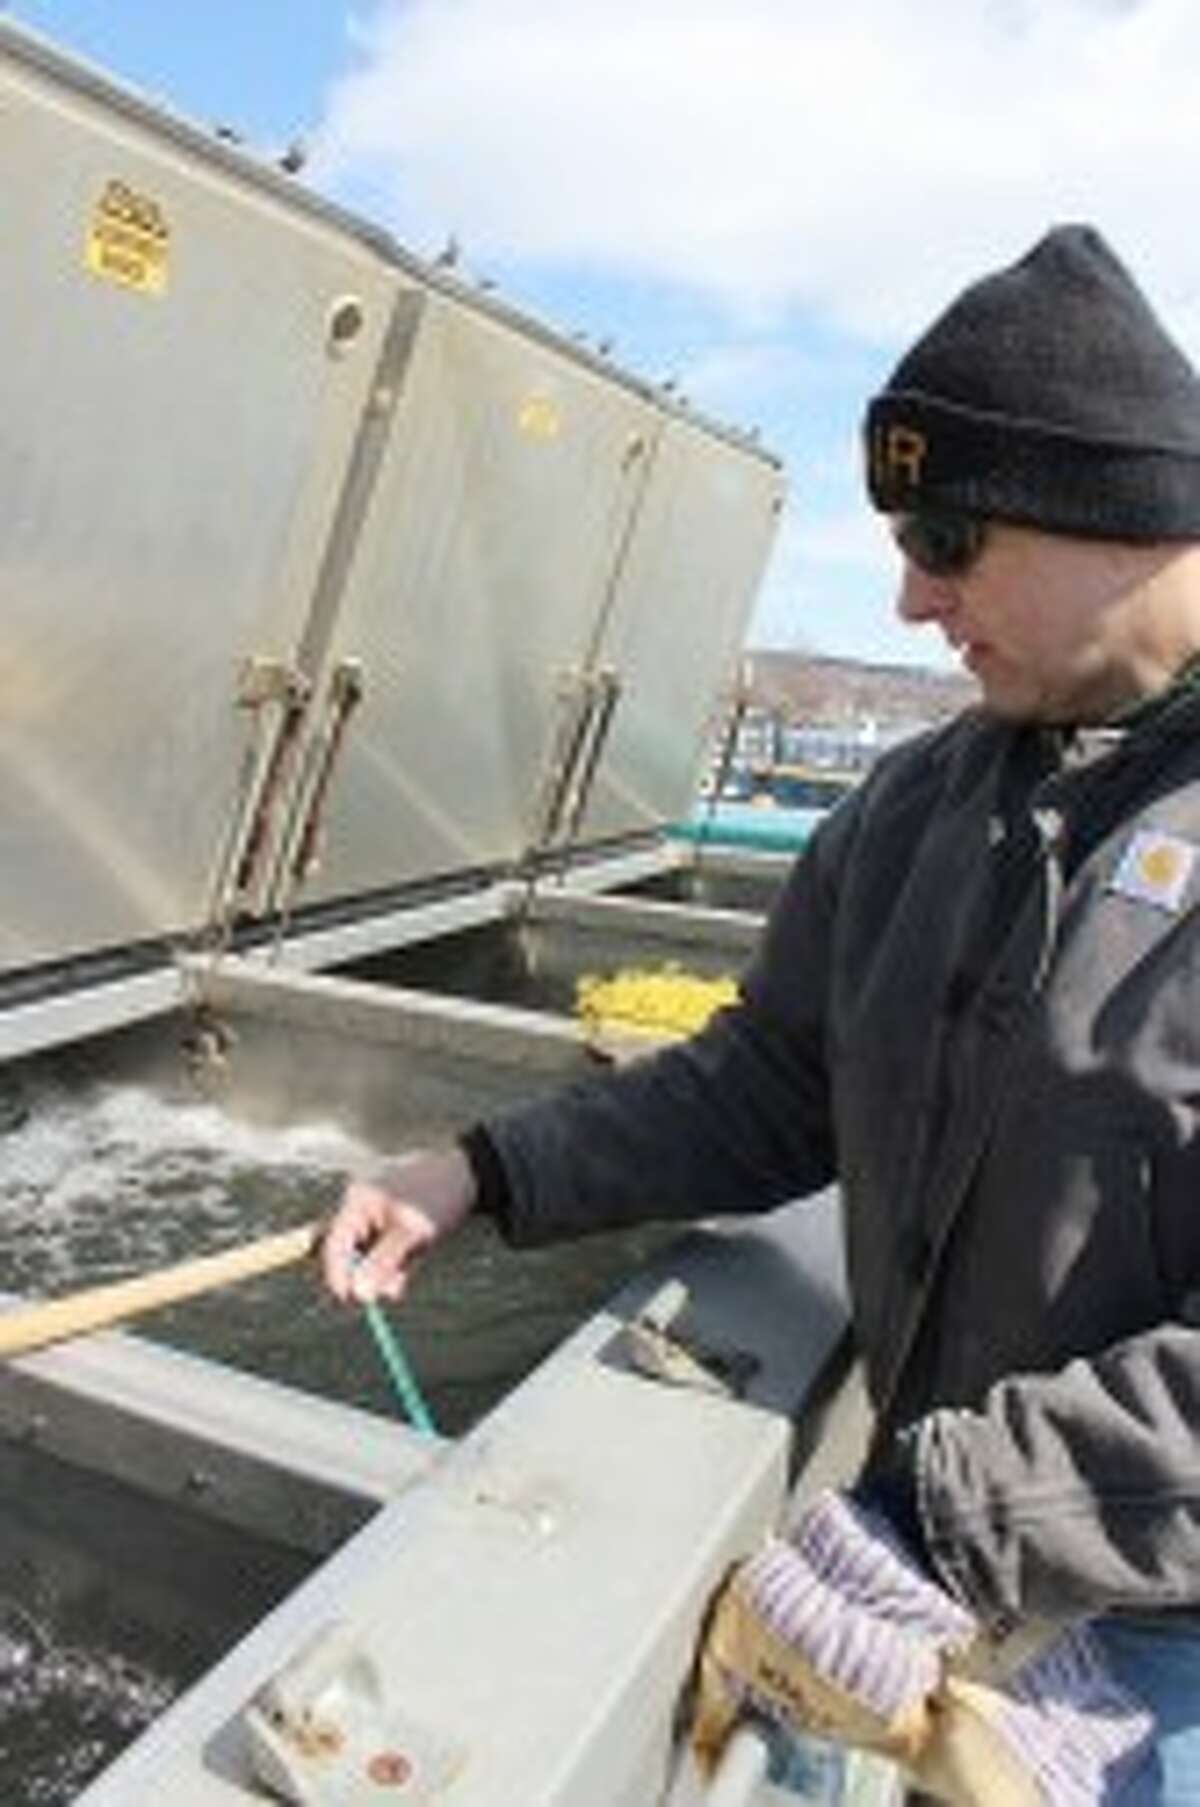 Steve Macloszek checks the temperature of the holding tank to make sure it isn’t too different from the temperature in the water. Fish should be released from higher temperatures to lower, which makes spring the best time for release. (Colin Merry/Pioneer News Network)